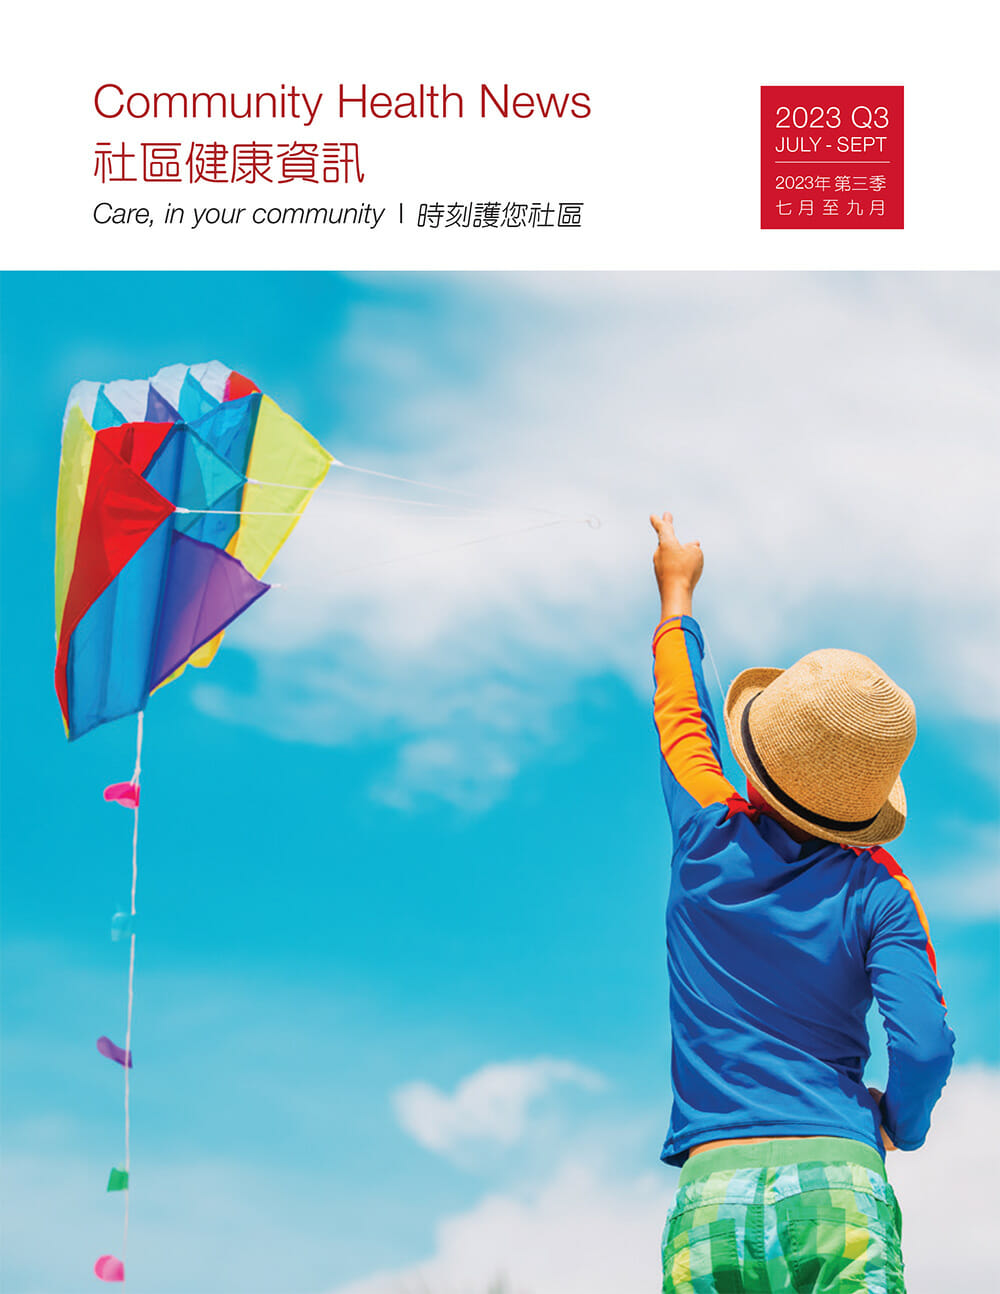 Newsletter cover kid with flying kite